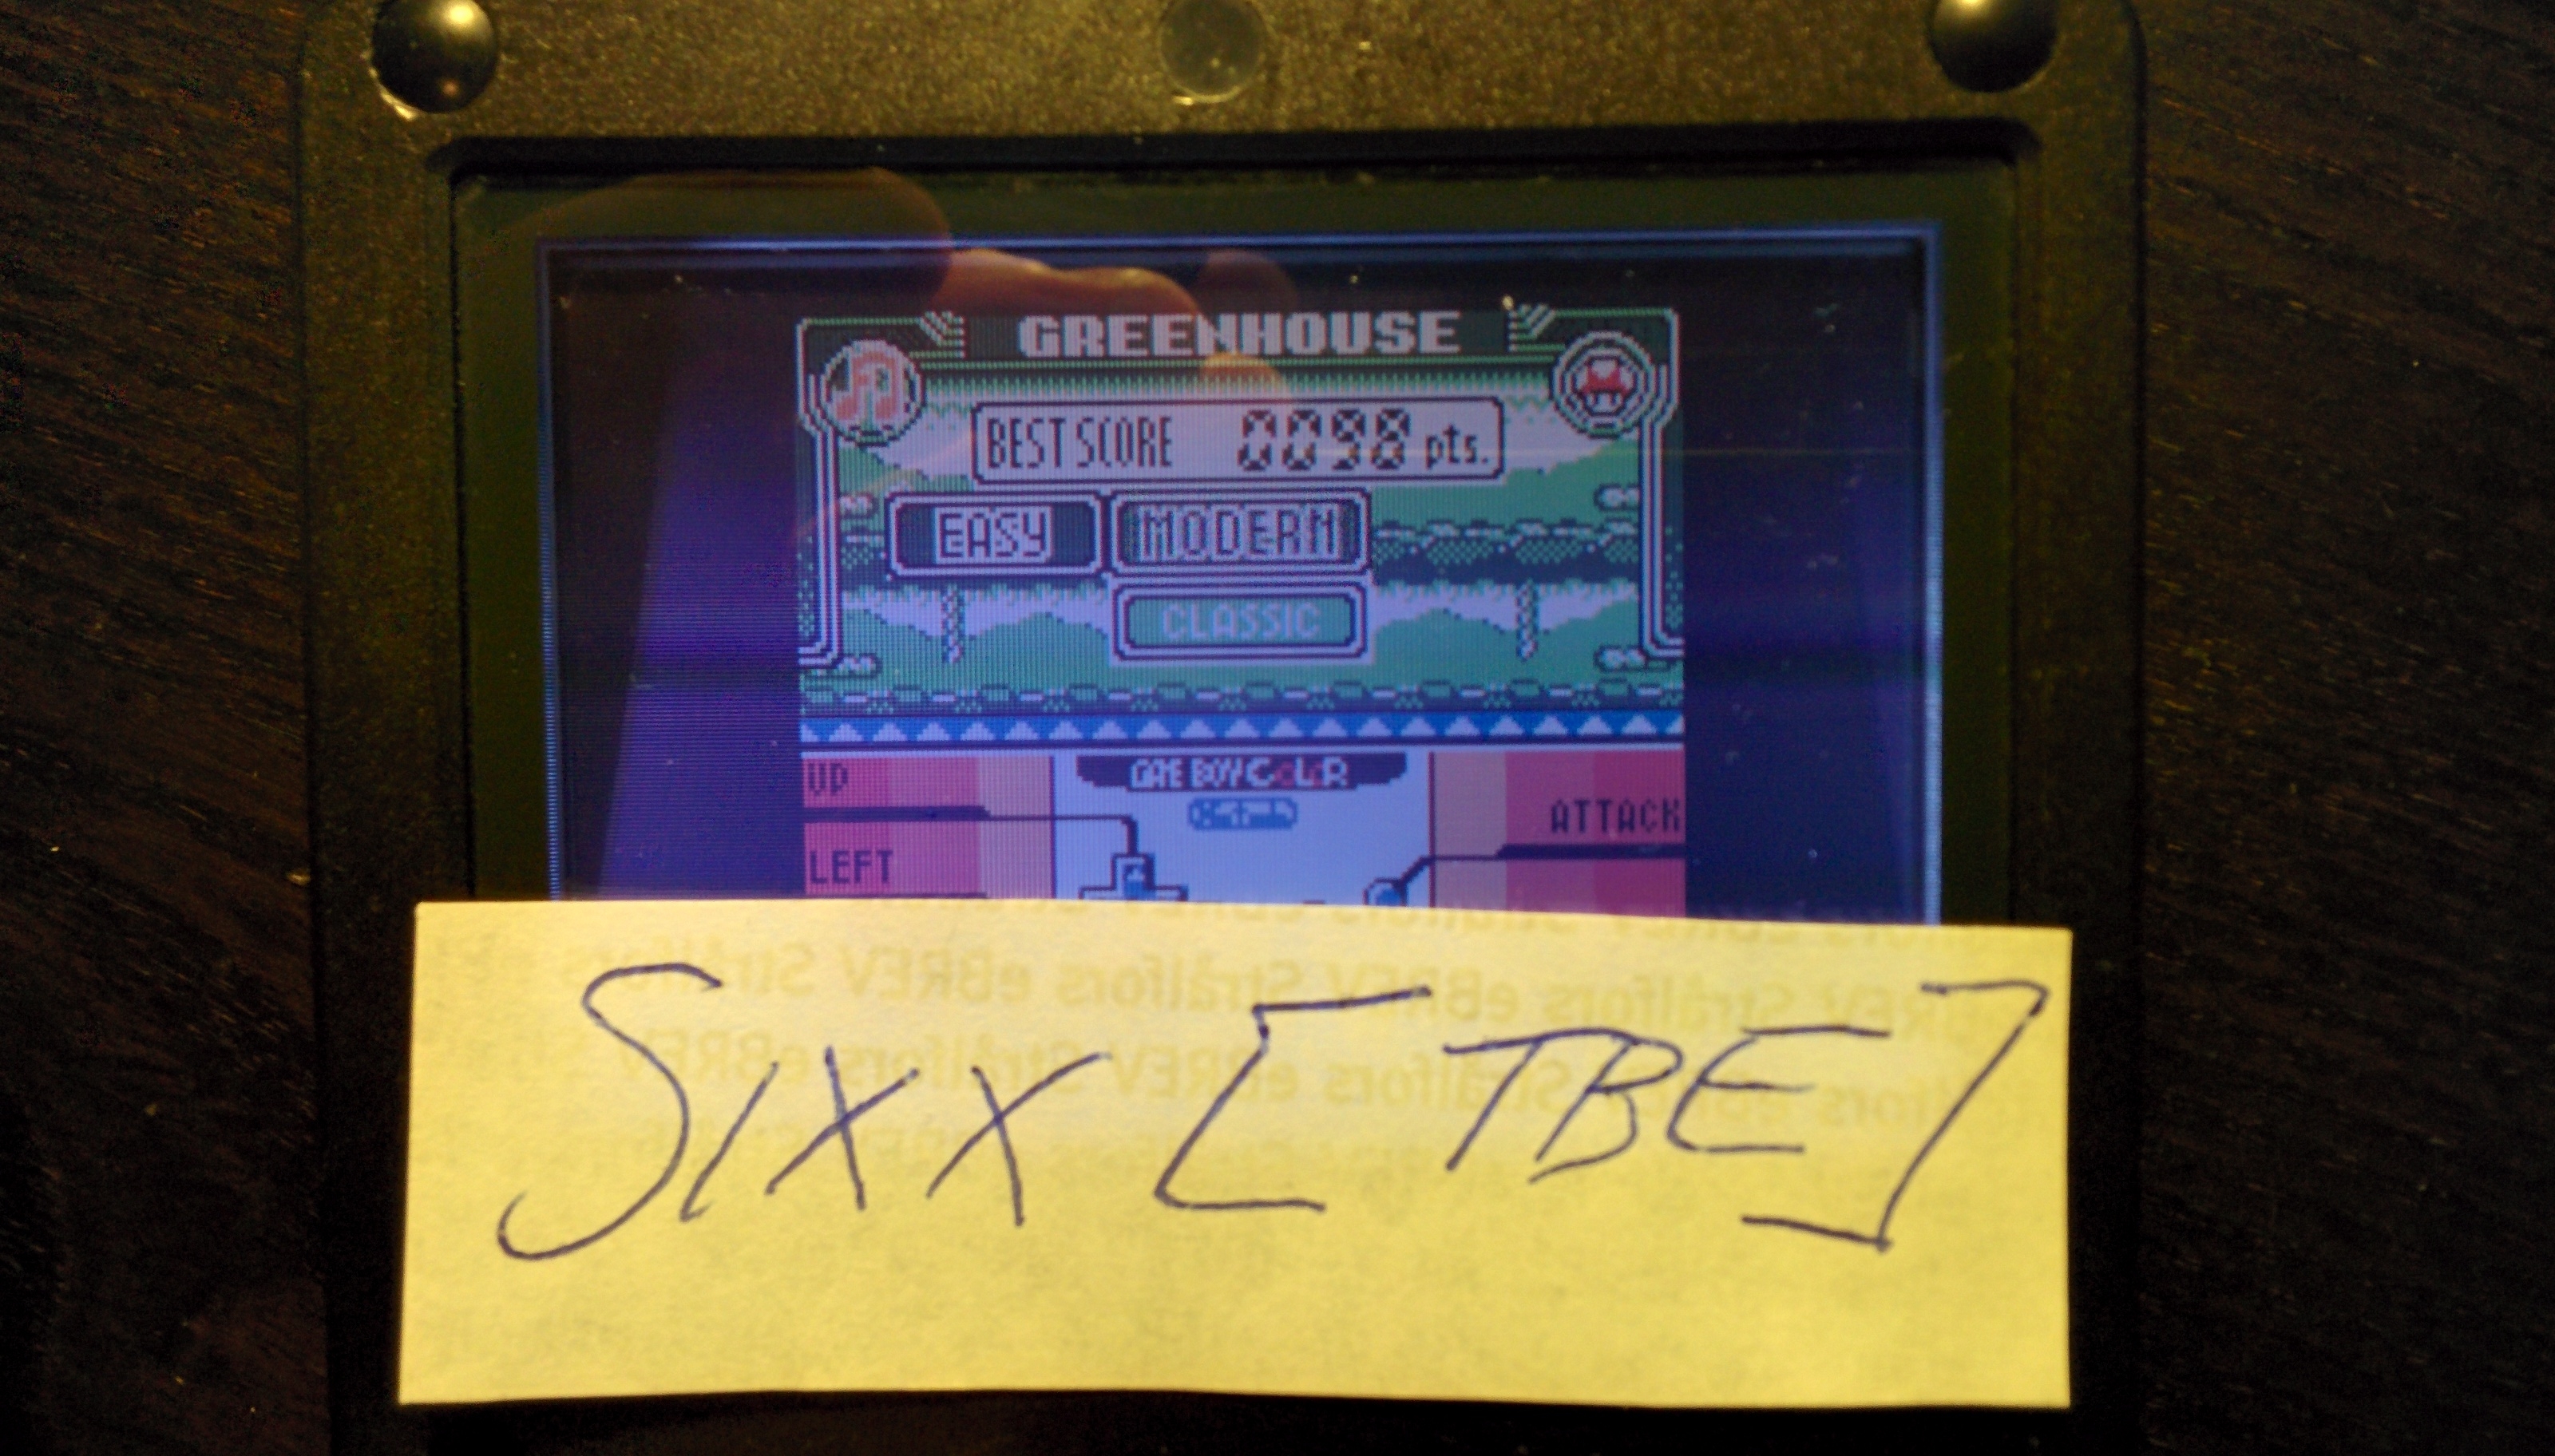 Sixx: Game & Watch Gallery 3: Greenhouse: Modern: Easy (Game Boy Color) 98 points on 2014-09-16 15:06:08